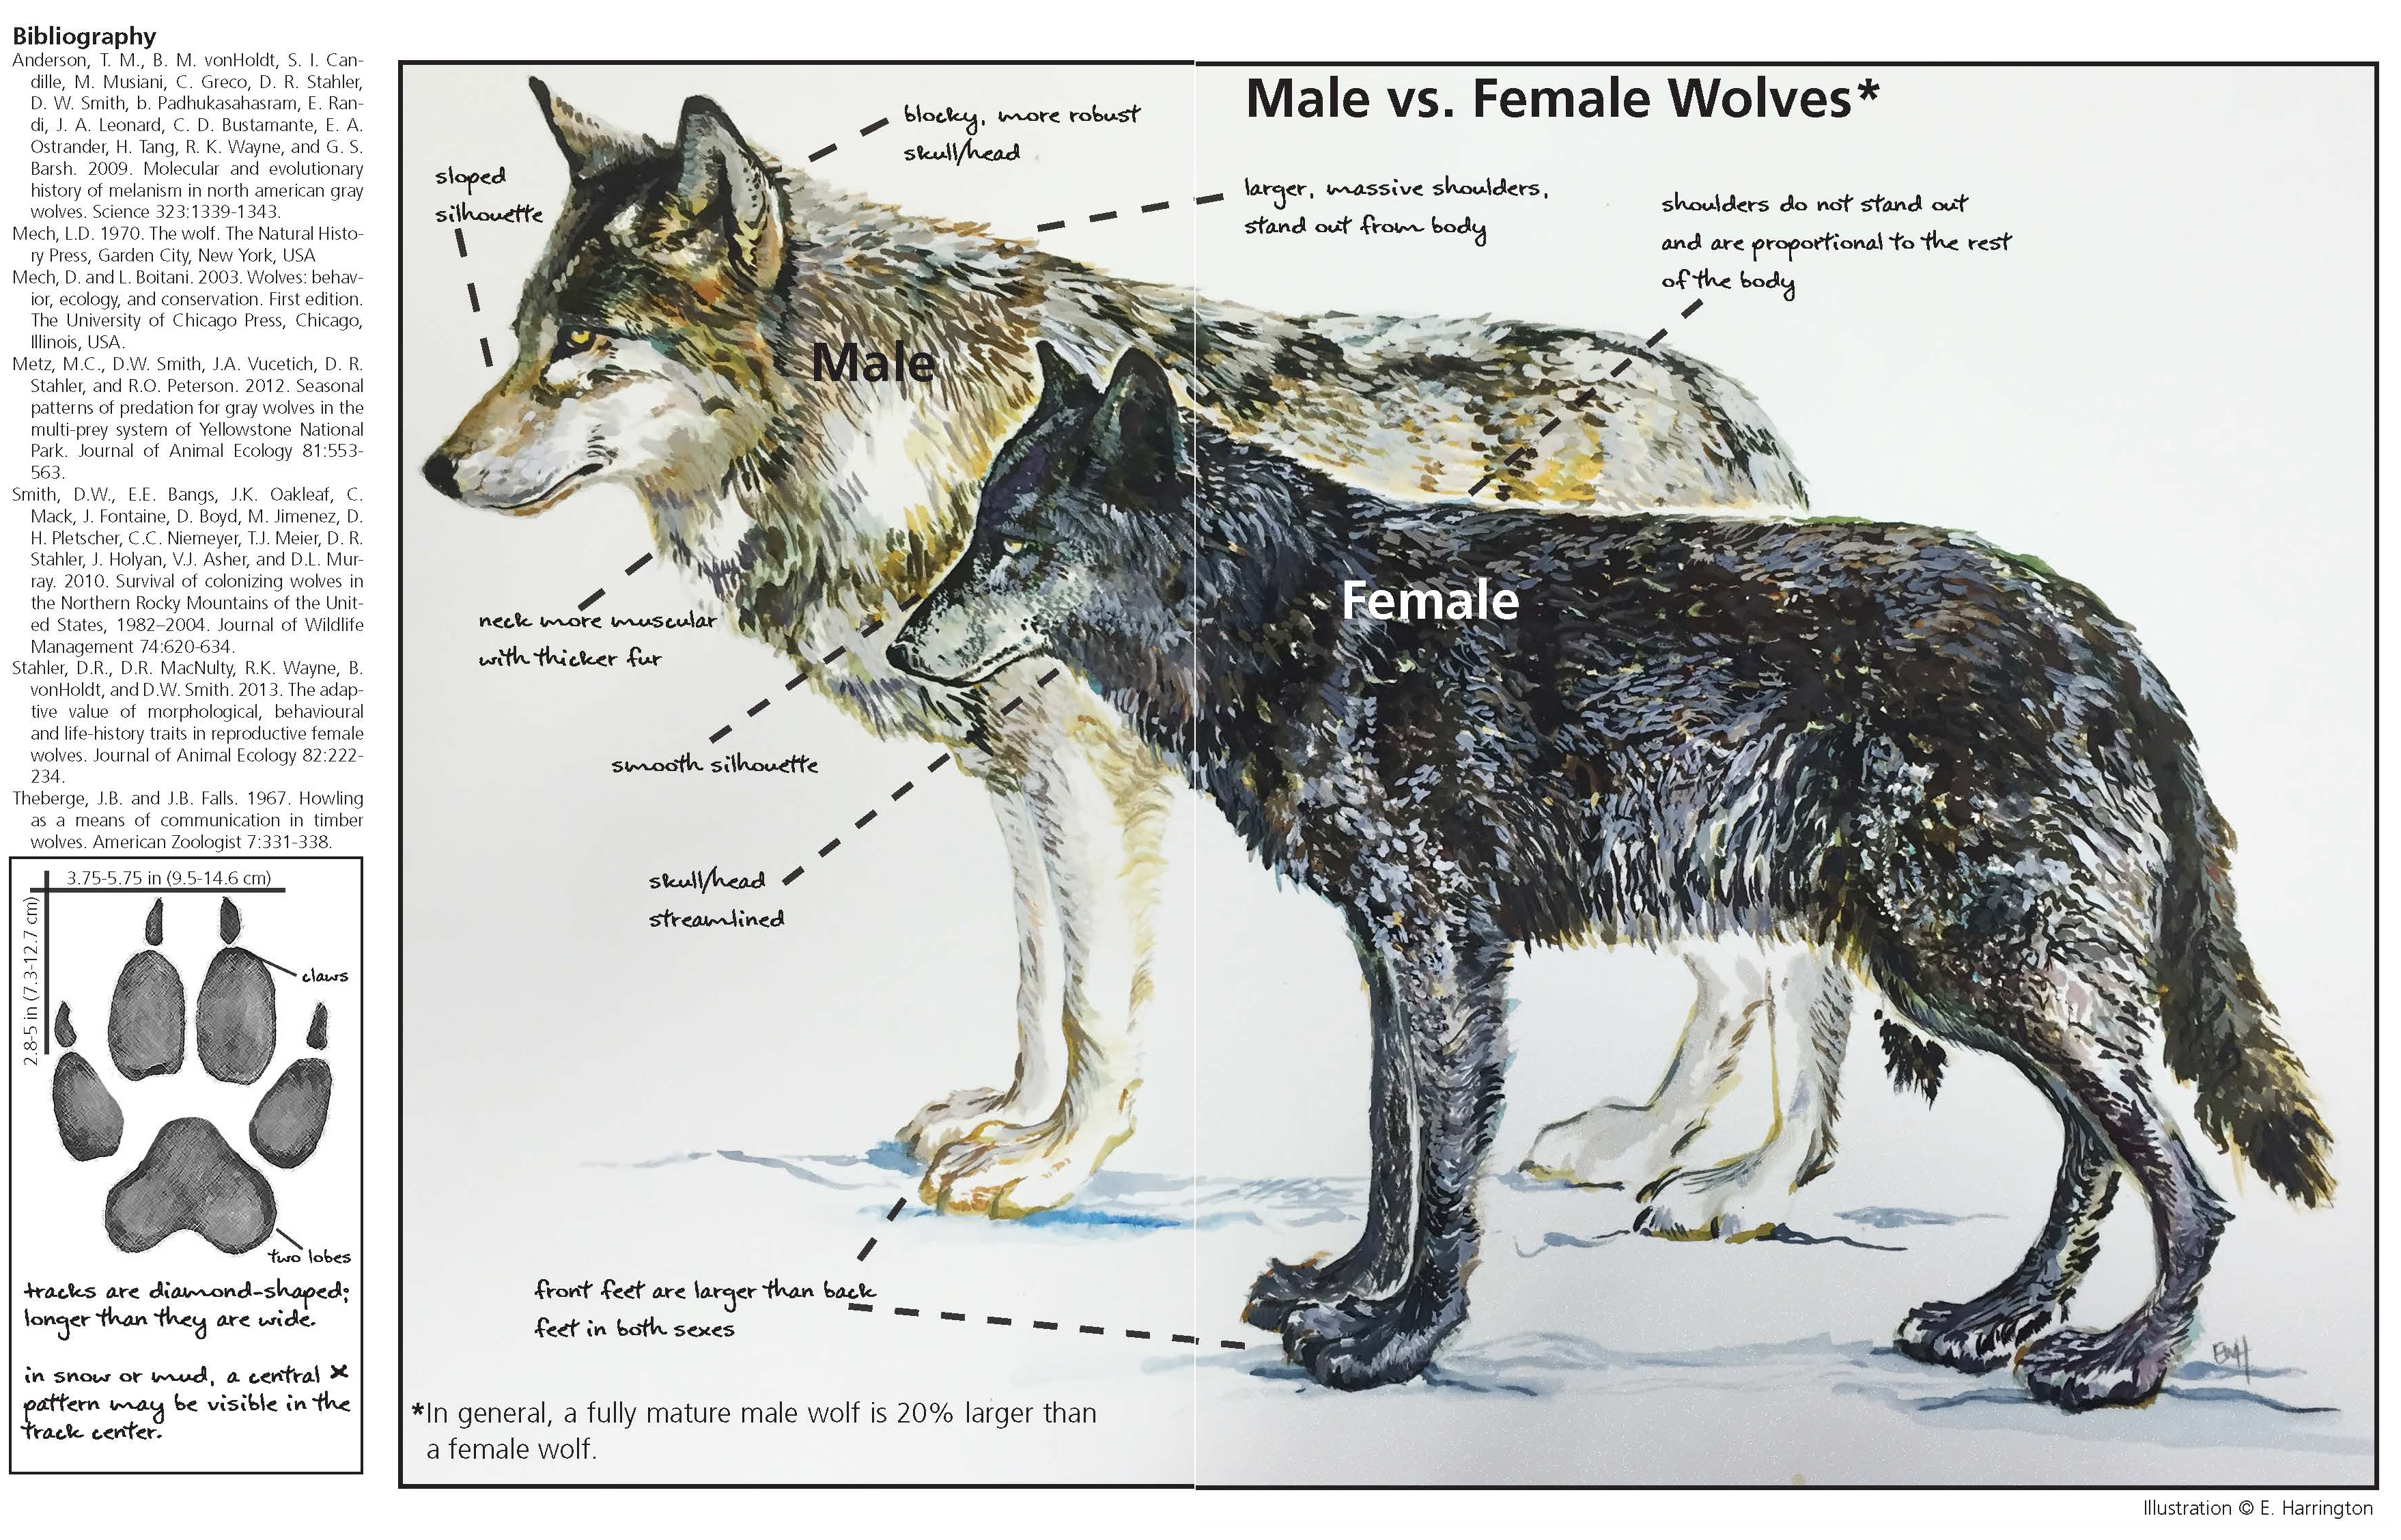 grey wolf size compared to human